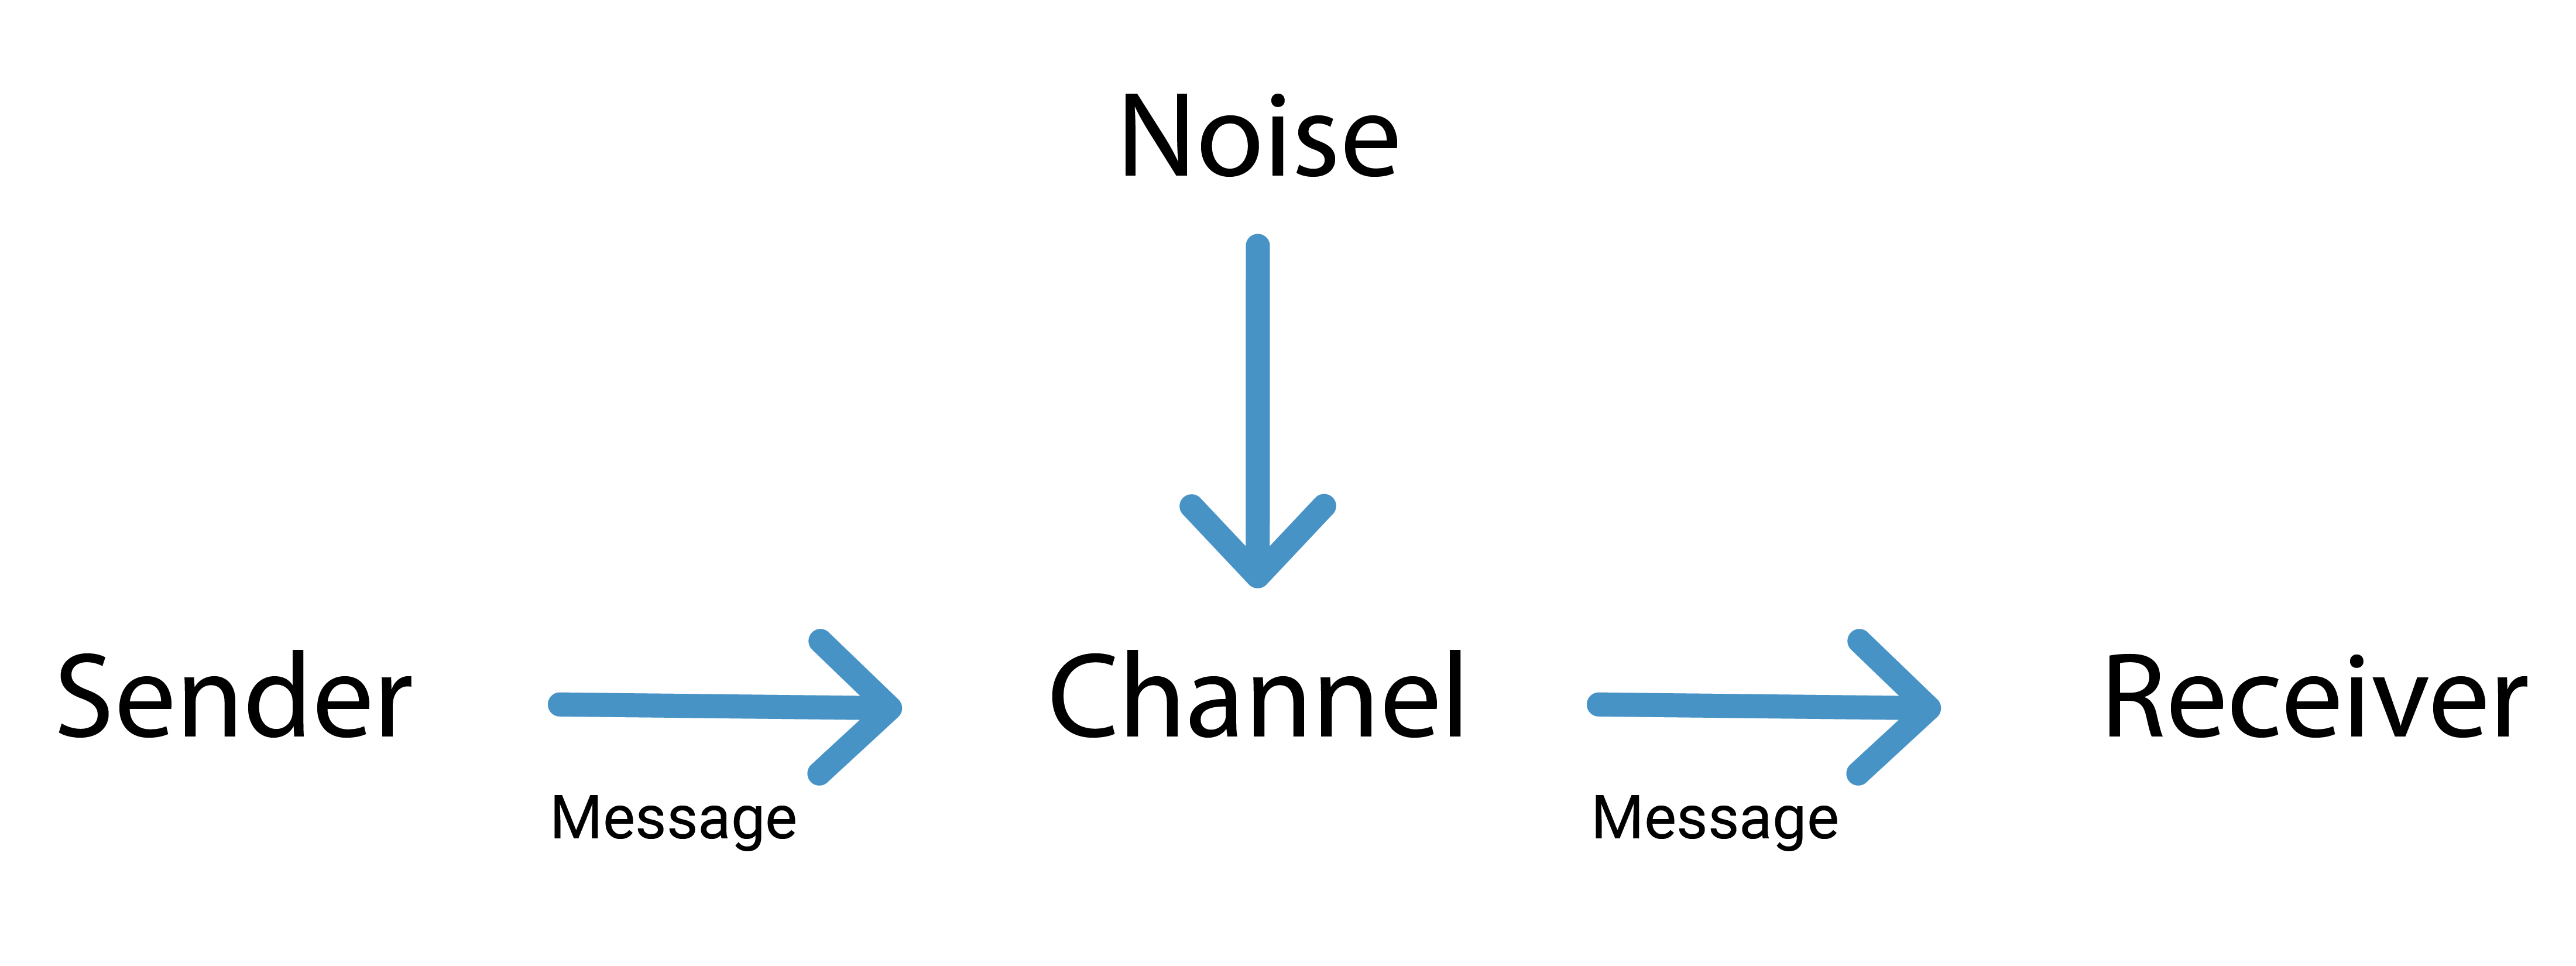 A diagram of communication showing how a message is sent. An arrow goes from the sender to the channel to the receiver. Another set of arrows goes from the noise to the channel to the receiver.